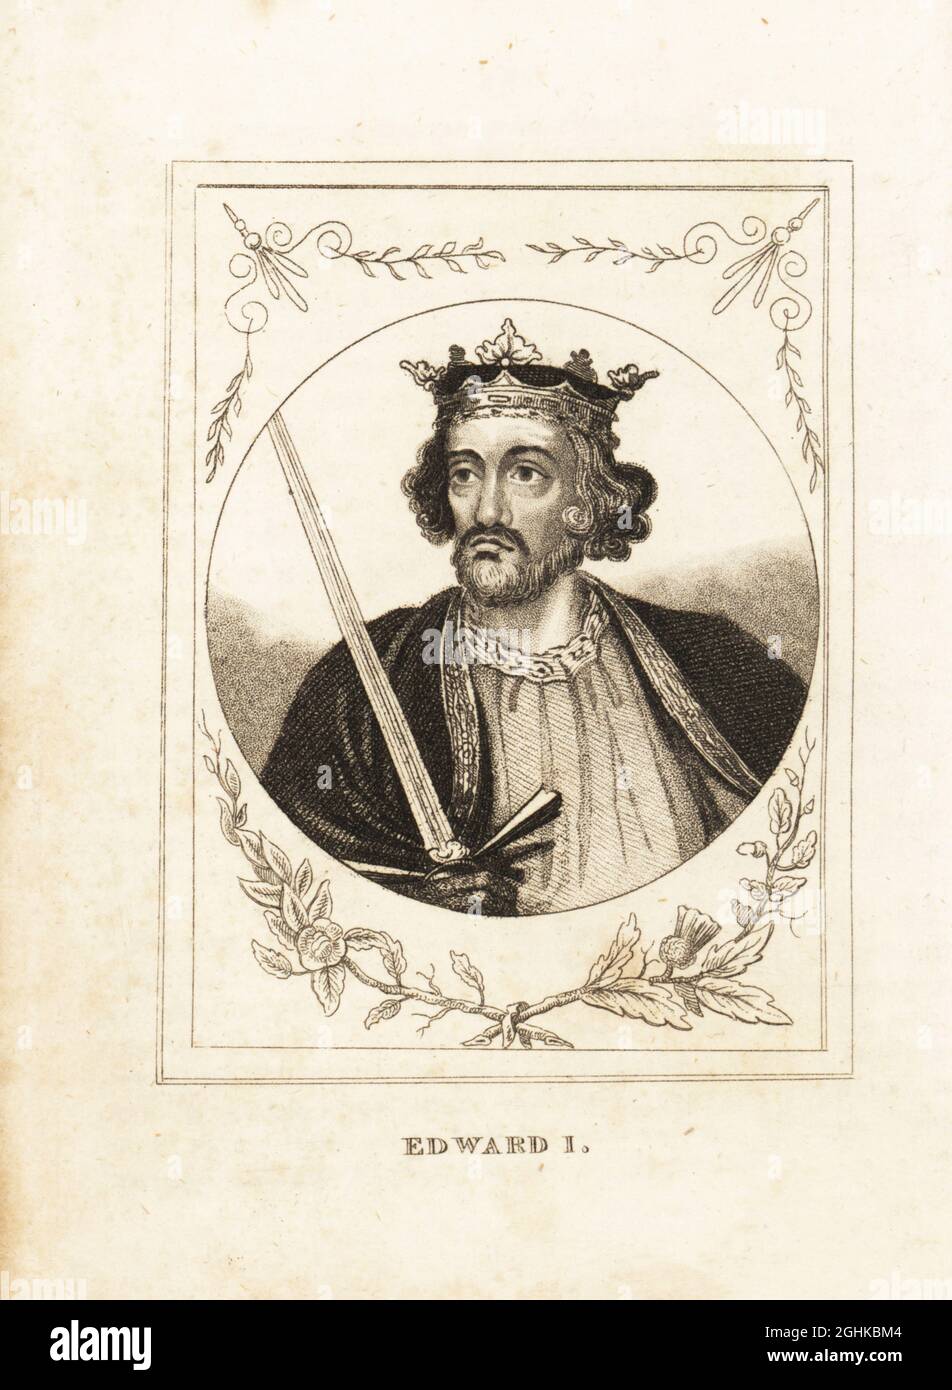 Portrait of King Edward I of England. With beard, crown, sword and cloak. Edward Longshanks or the Hammer of the Scots., 1239-1307. Copperplate engraving from M. A. Jones’ History of England from Julius Caesar to George IV, G. Virtue, 26 Ivy Lane, London, 1836. Stock Photo